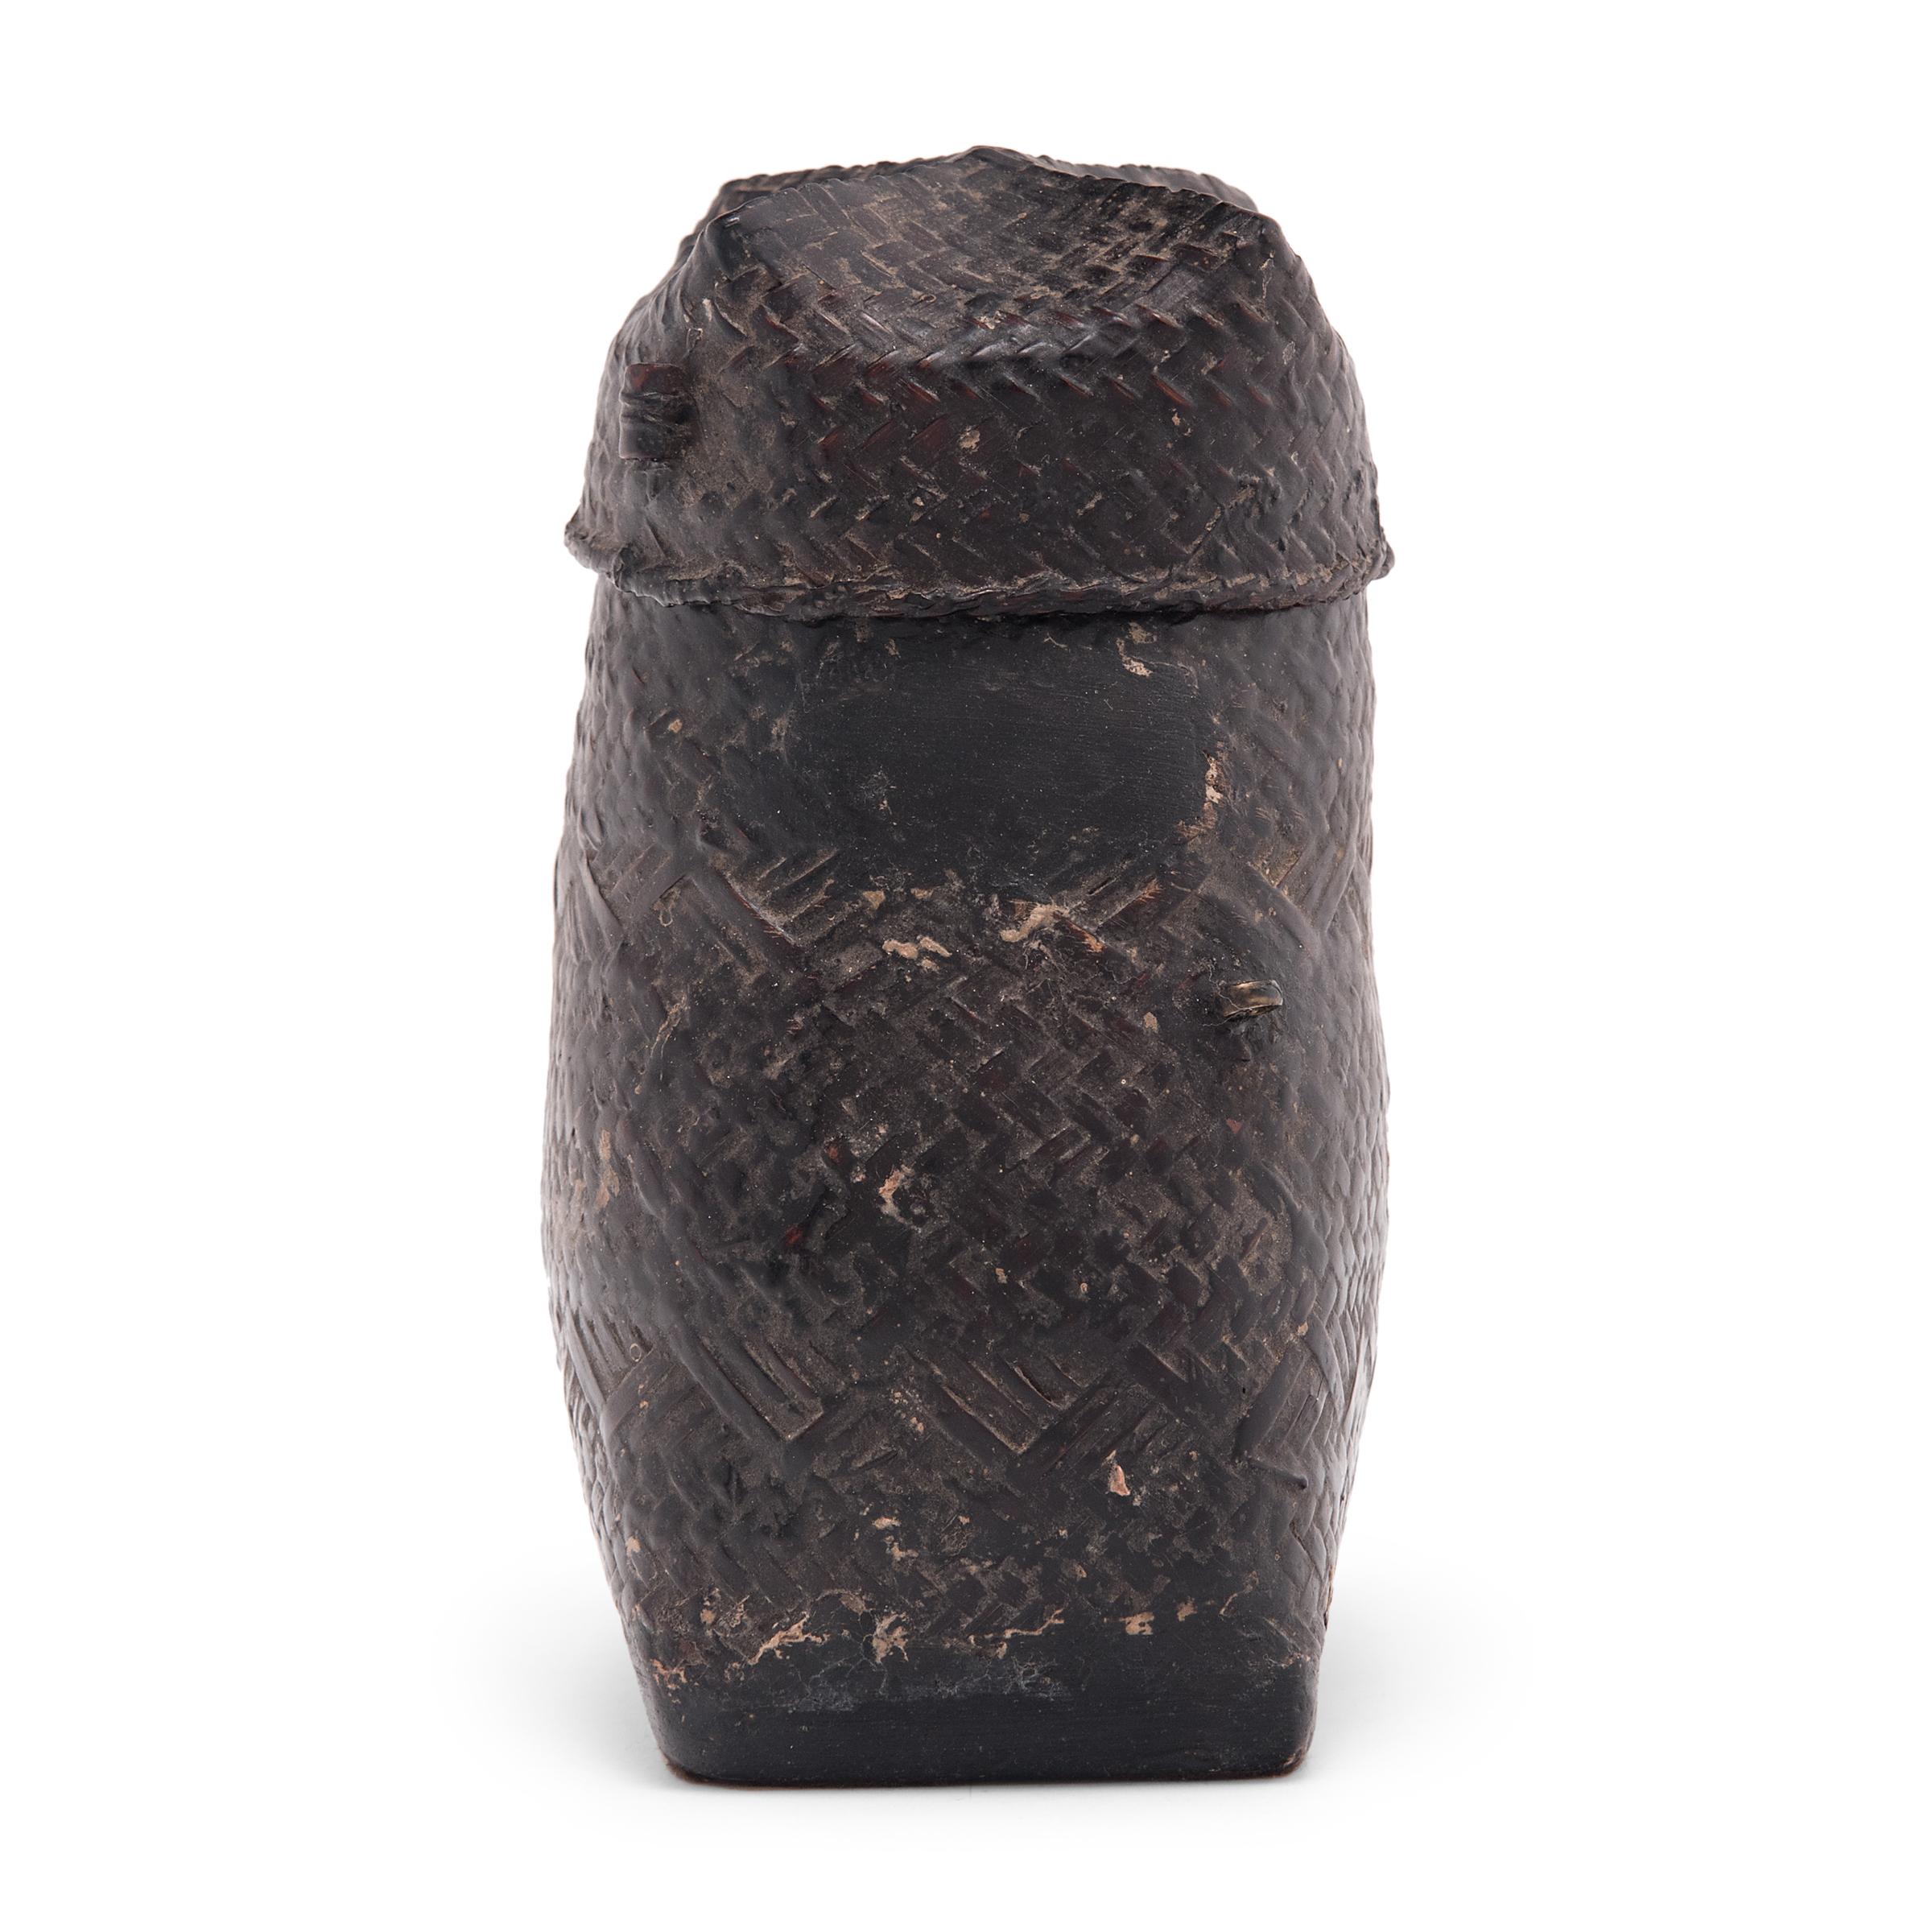 Dated to the early 20th-century, this petite box was woven of thin bamboo strips and coated in a putty-like substance known as thayo, comprised of black lacquer and sawdust. The box has a square wooden base and tapers to a narrow rounded opening.